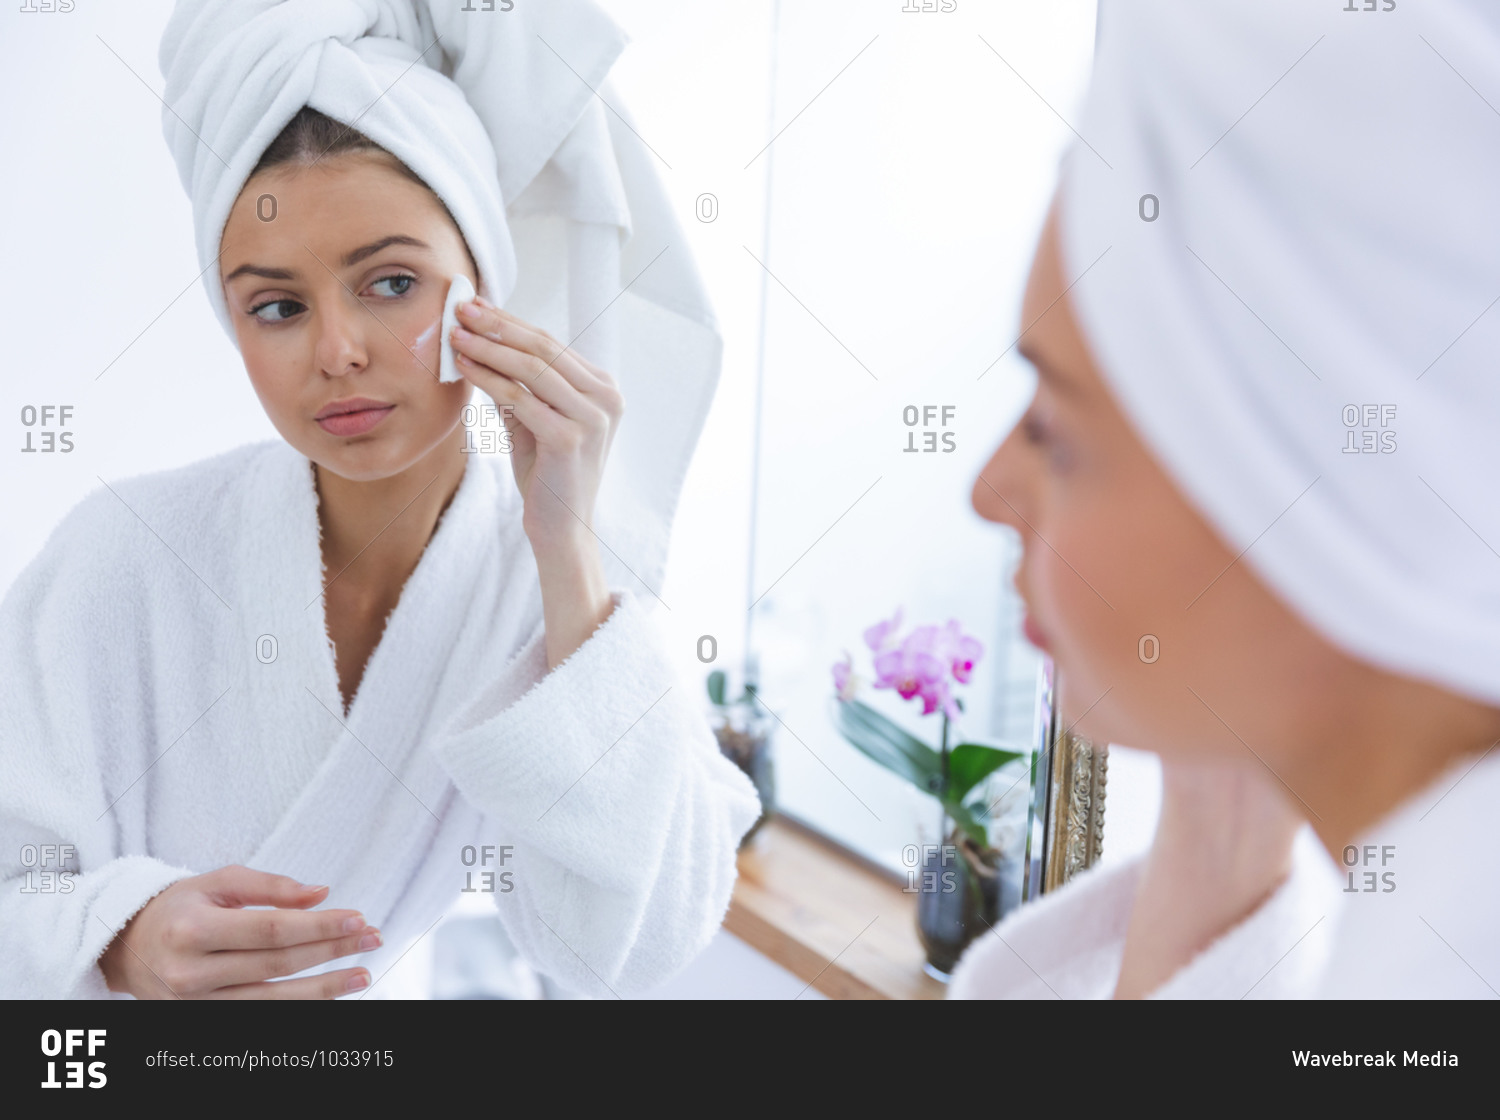 Caucasian woman spending time at home, standing in bathroom, looking in mirror removing make up with cotton pad. Social distancing during Covid 19 Coronavirus quarantine lockdown.